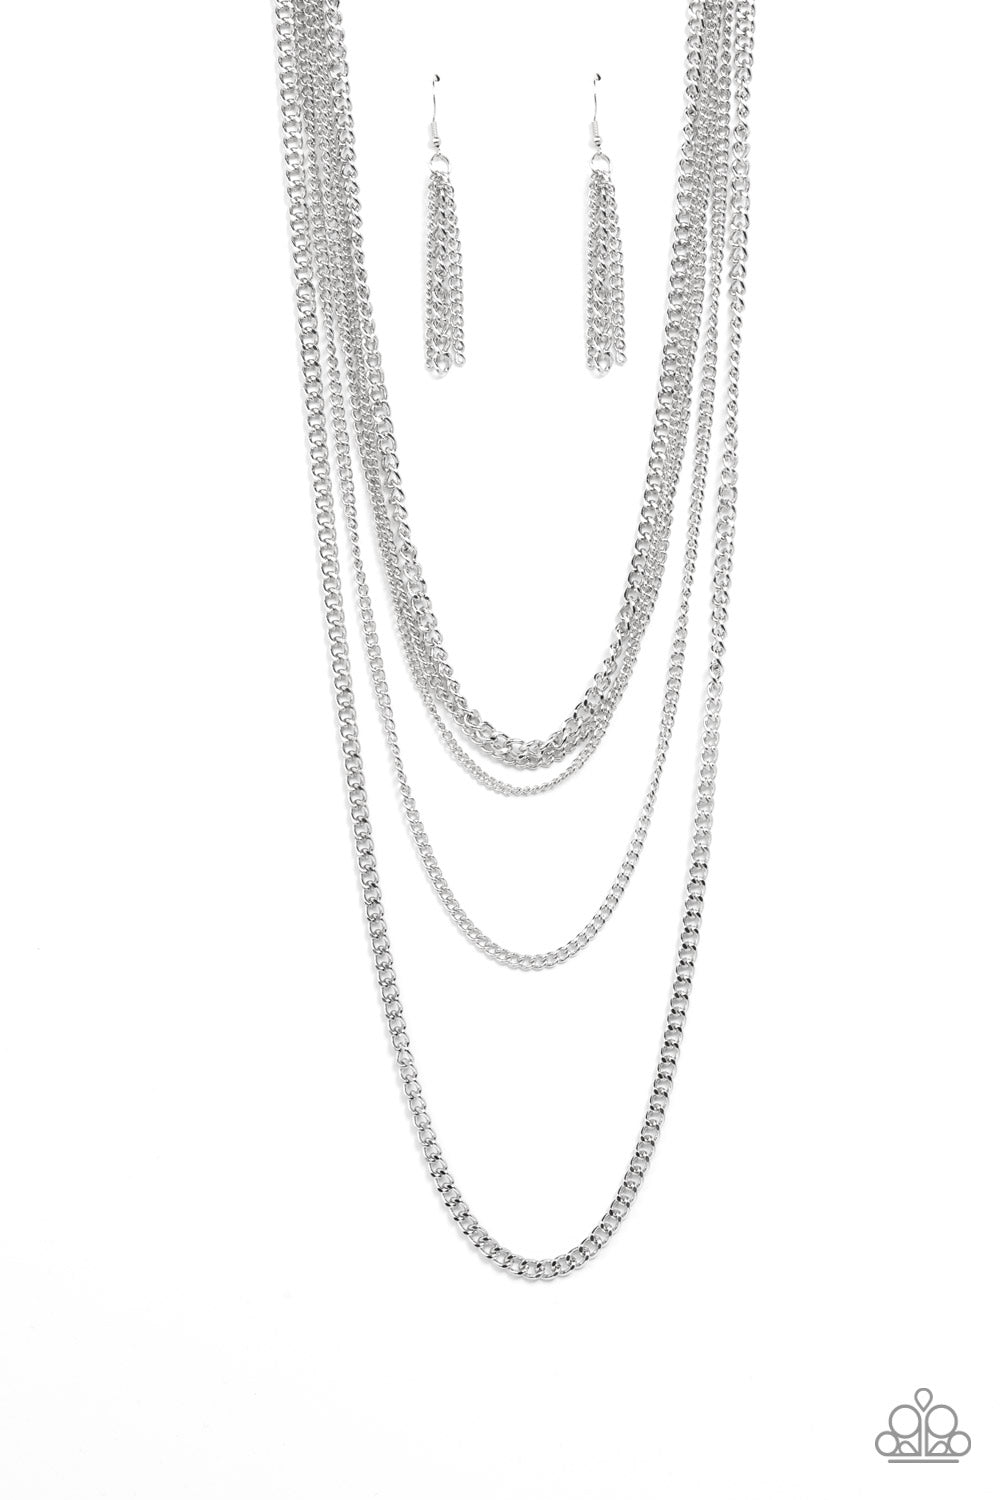 Top of the Food Chain Silver Necklace - Paparazzi Accessories  An intense display of mismatched silver chains boldly layer across the chest, resulting in an edgy industrial vibe. Features an adjustable clasp closure.  Sold as one individual necklace. Includes one pair of matching earrings.